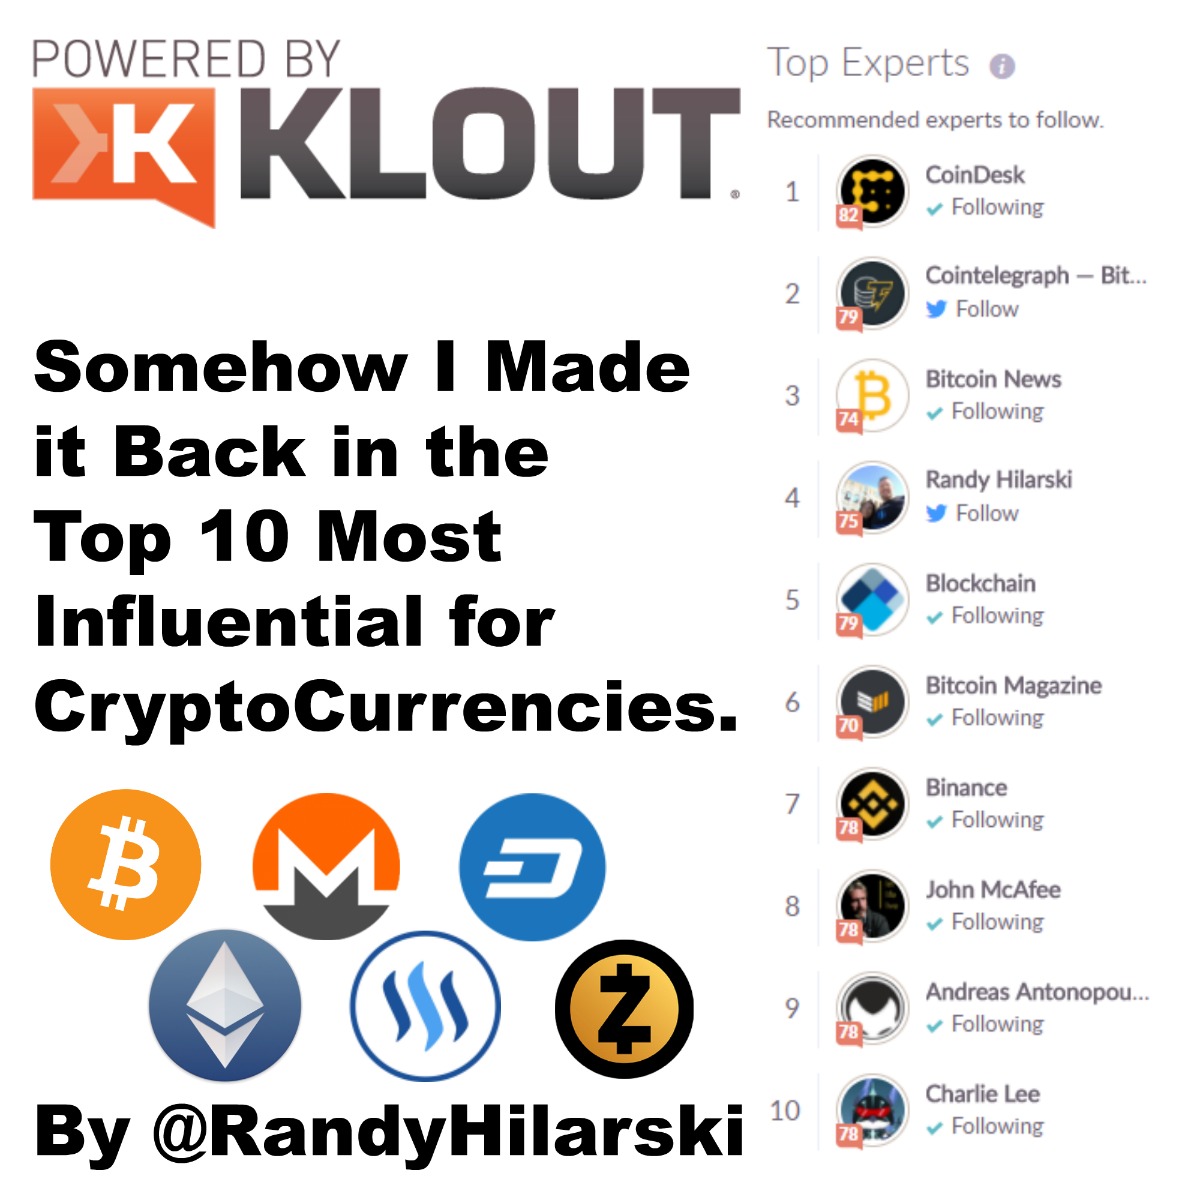 top-experts-crypto-currency-klout-big-data-hilarski.png.jpg